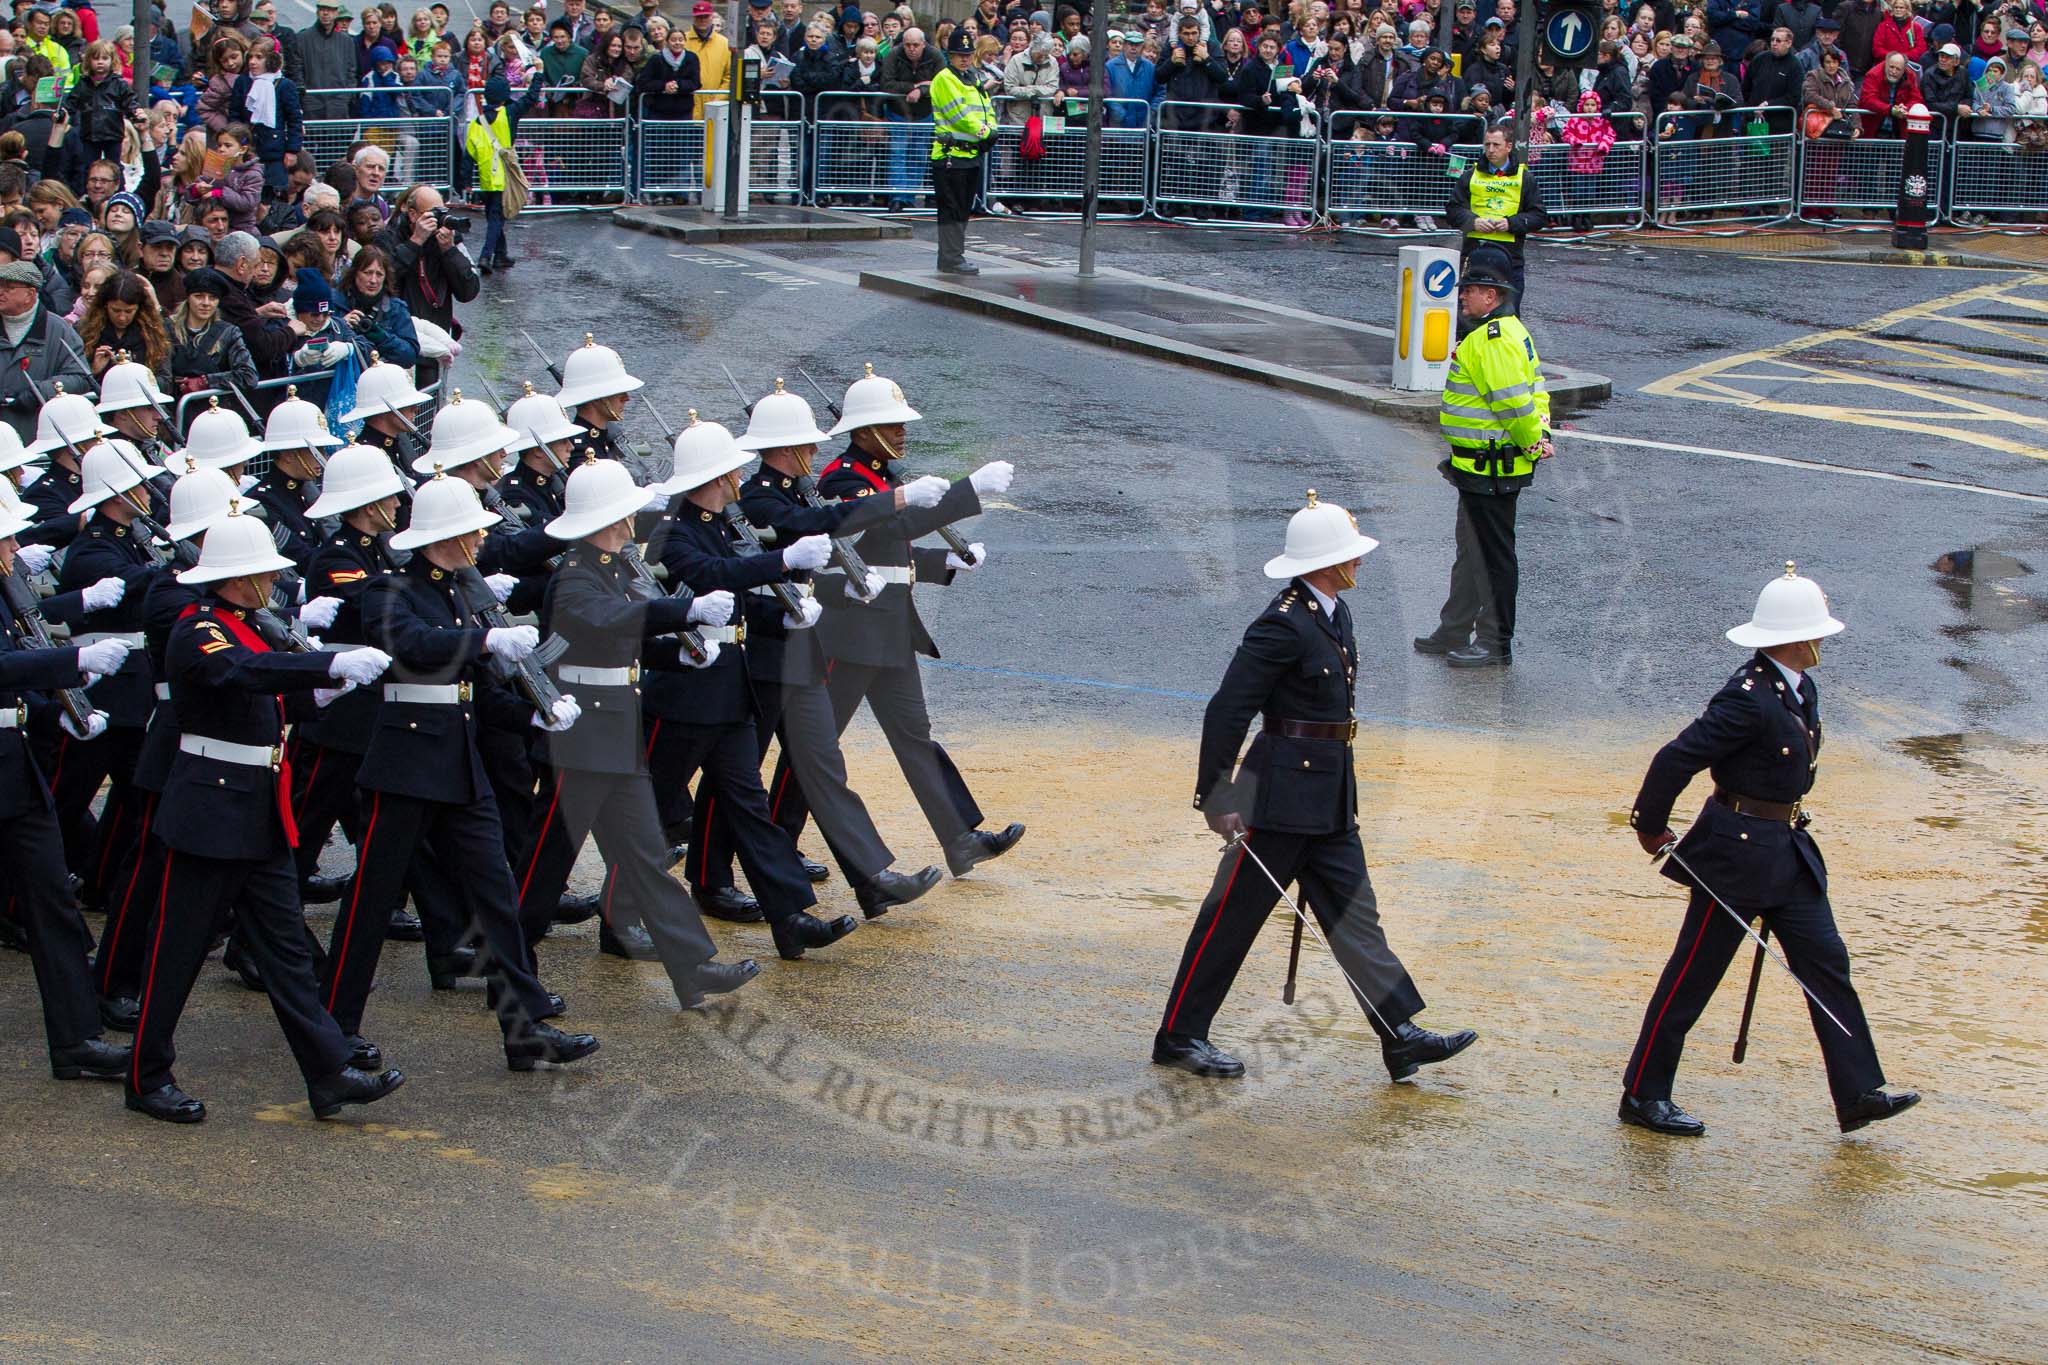 Lord Mayor's Show 2012: Entry 88 - Royal Marines..
Press stand opposite Mansion House, City of London,
London,
Greater London,
United Kingdom,
on 10 November 2012 at 11:39, image #1157